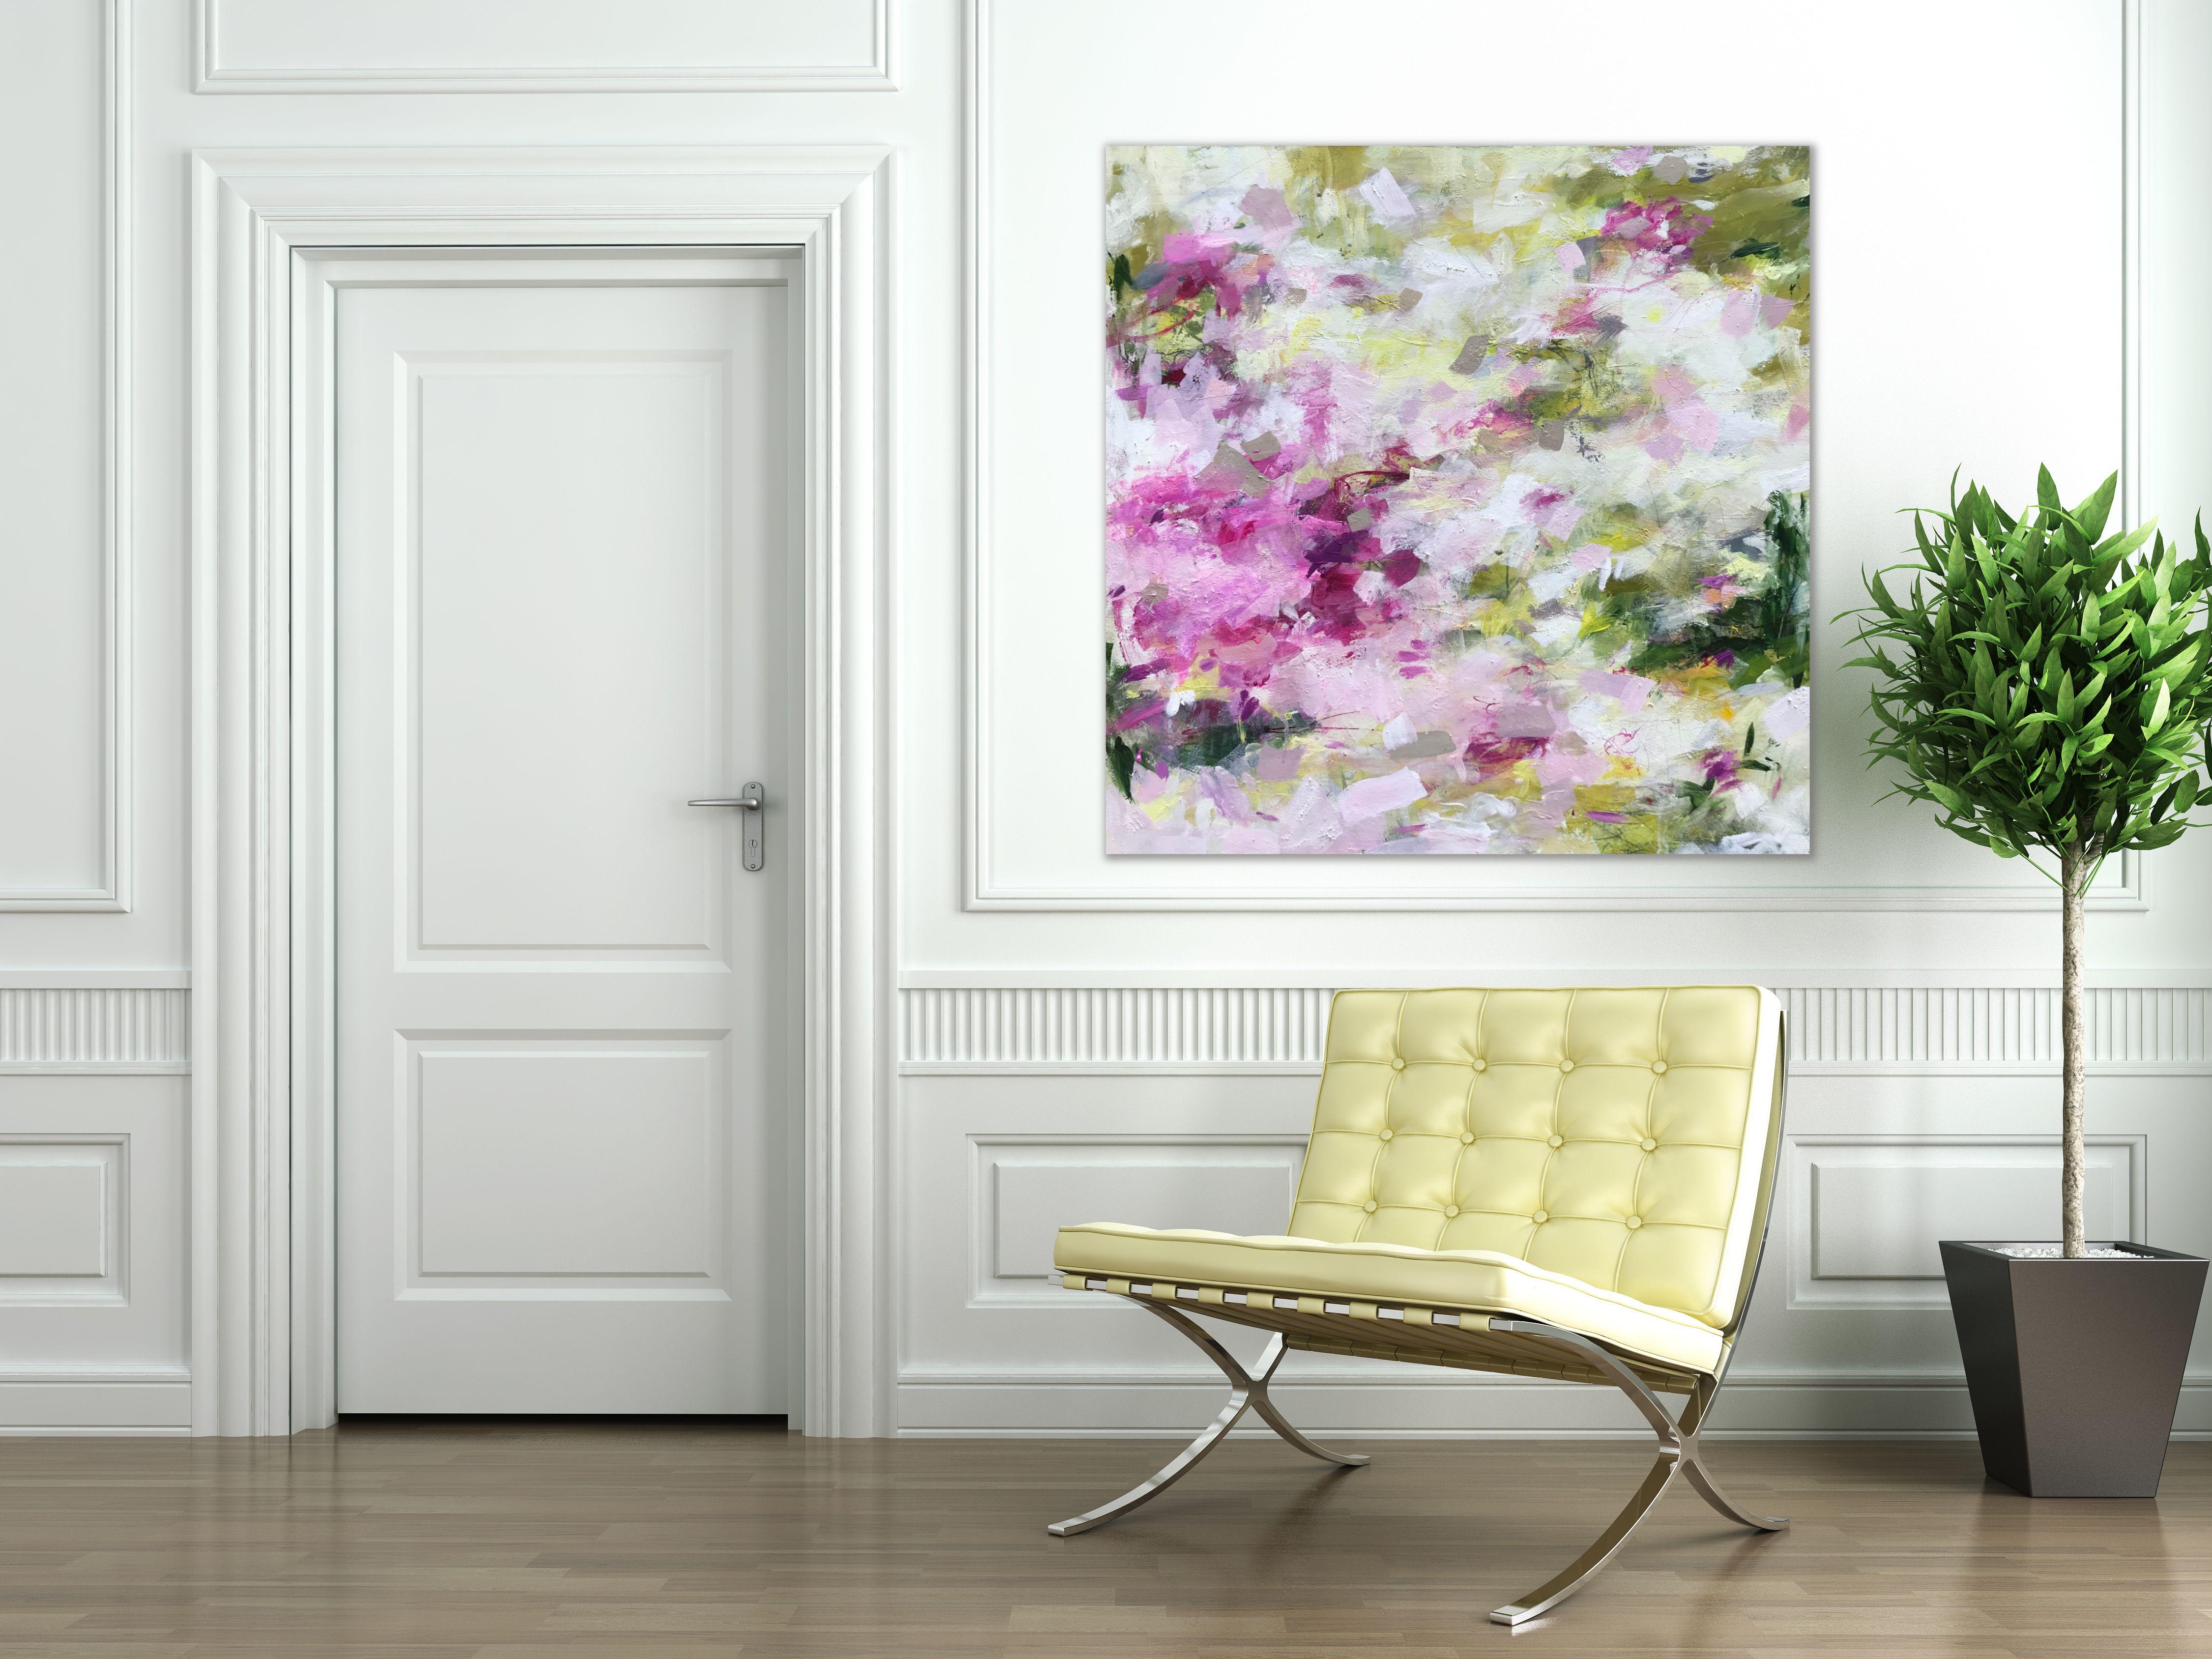 This beautifully vibrant and uplifting painting has been built over many layers of paint and grew out of a slow process. Its palette attempts to capture the notion of freshness and vibrancy that abounds in summer with flowers opening to greet the